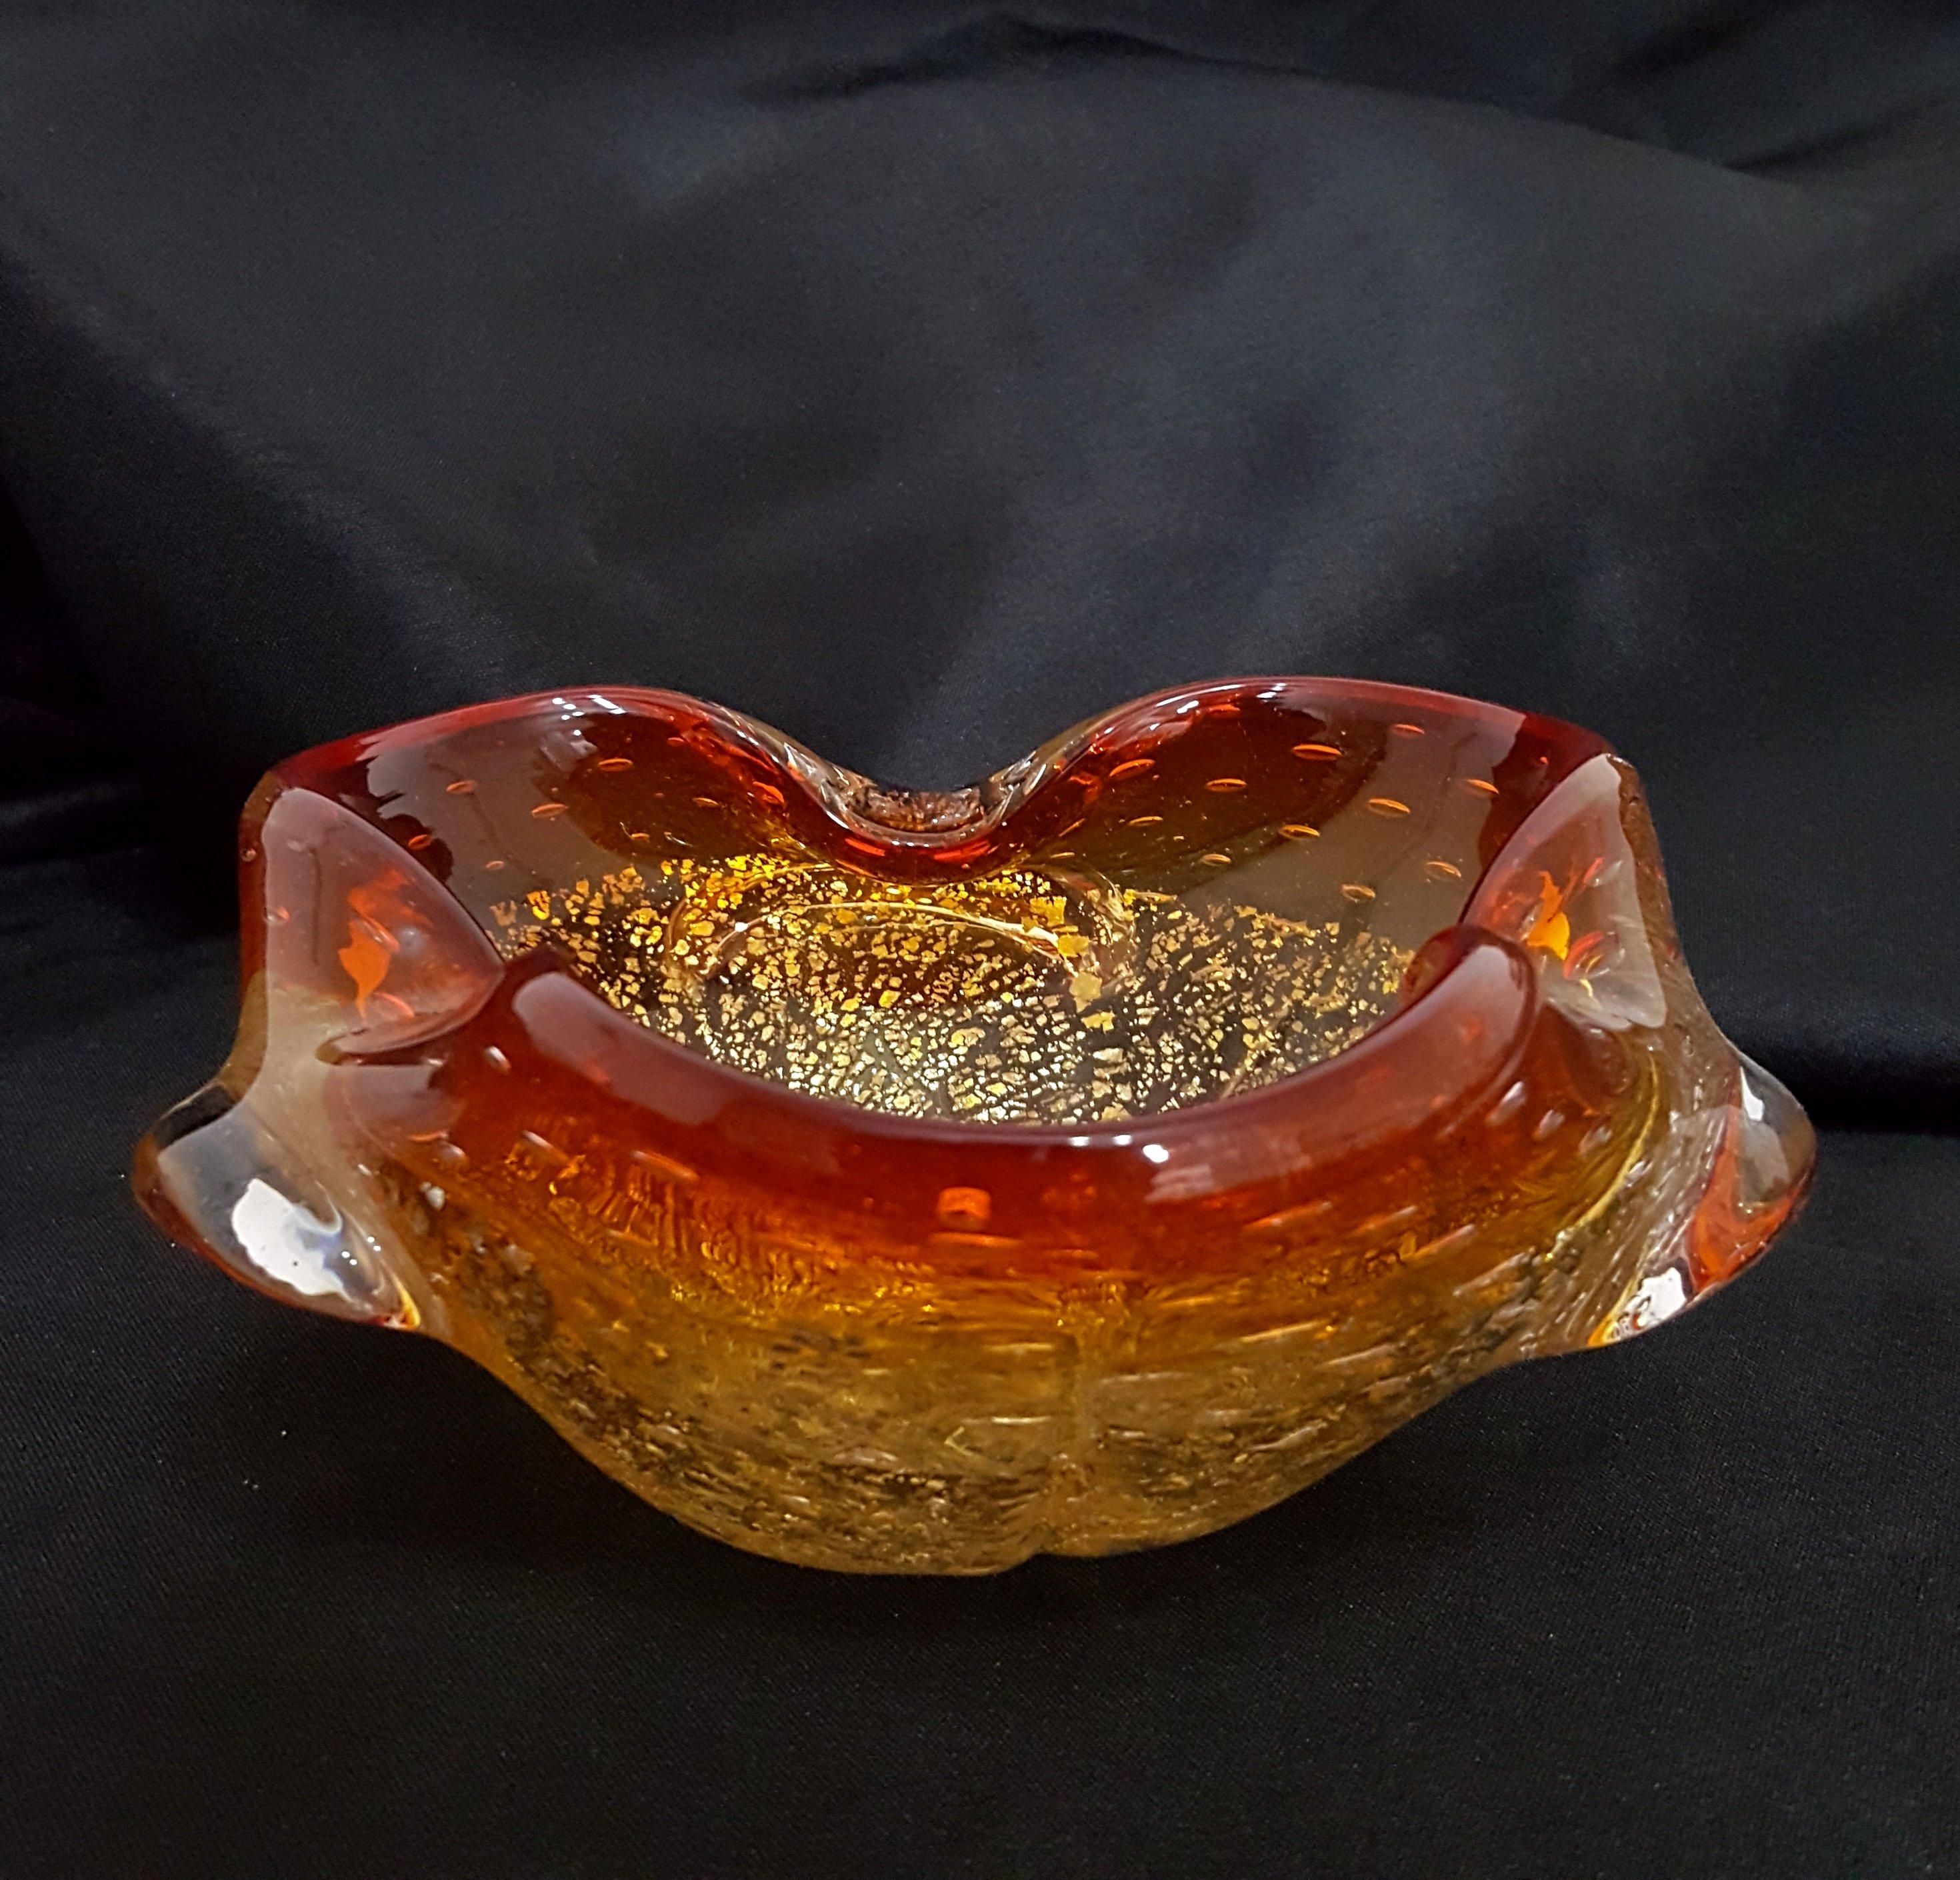 Murano Glass Dish / Bowl with Aventurine - vintage - could be Barovier & Toso but I can't be sure.  Beautiful plum hues with gold and silver. 
Nice vintage condition.  Apx 6 x 2 inches.

Measurements are approximate. Please be aware that the color